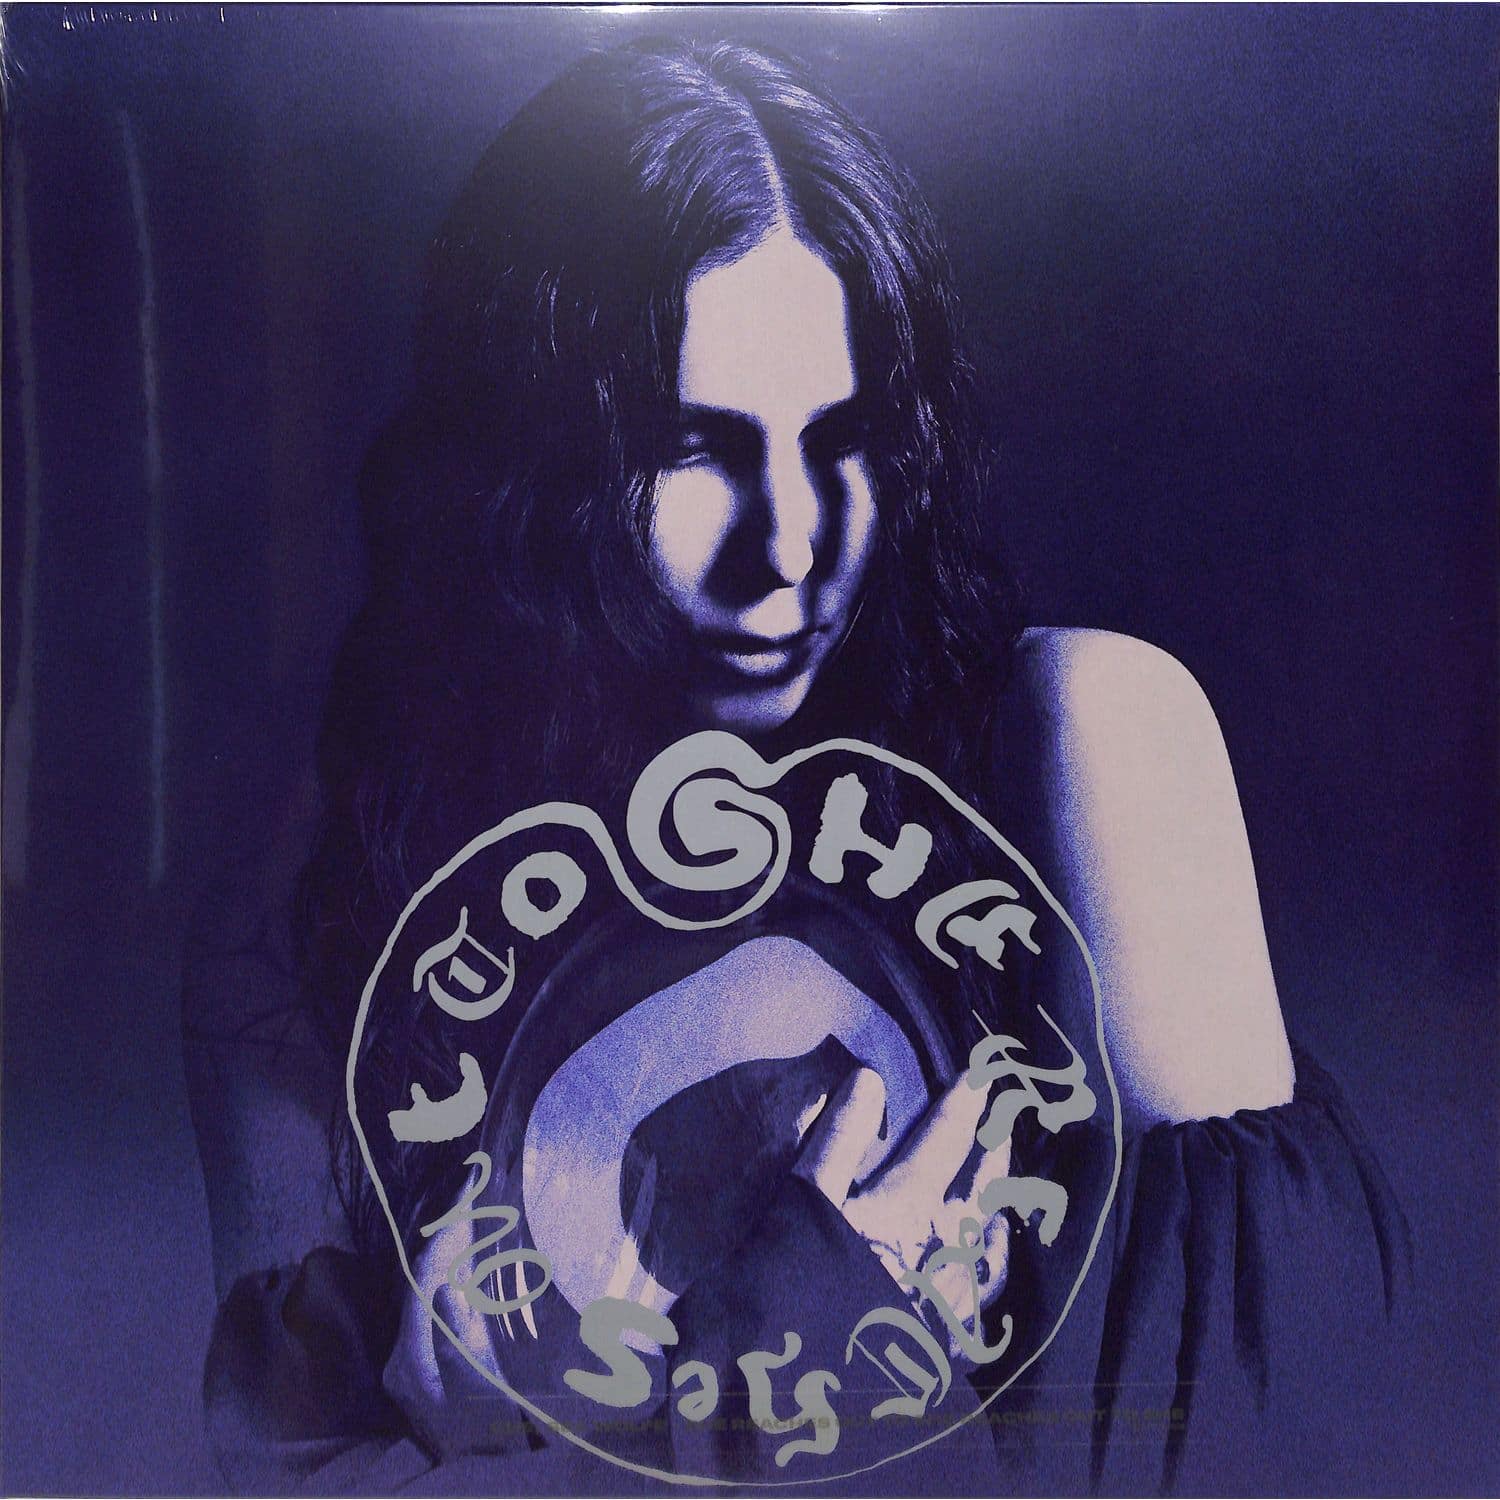 Chelsea Wolfe - SHE REACHES OUT TO SHE REACHES OUT? 